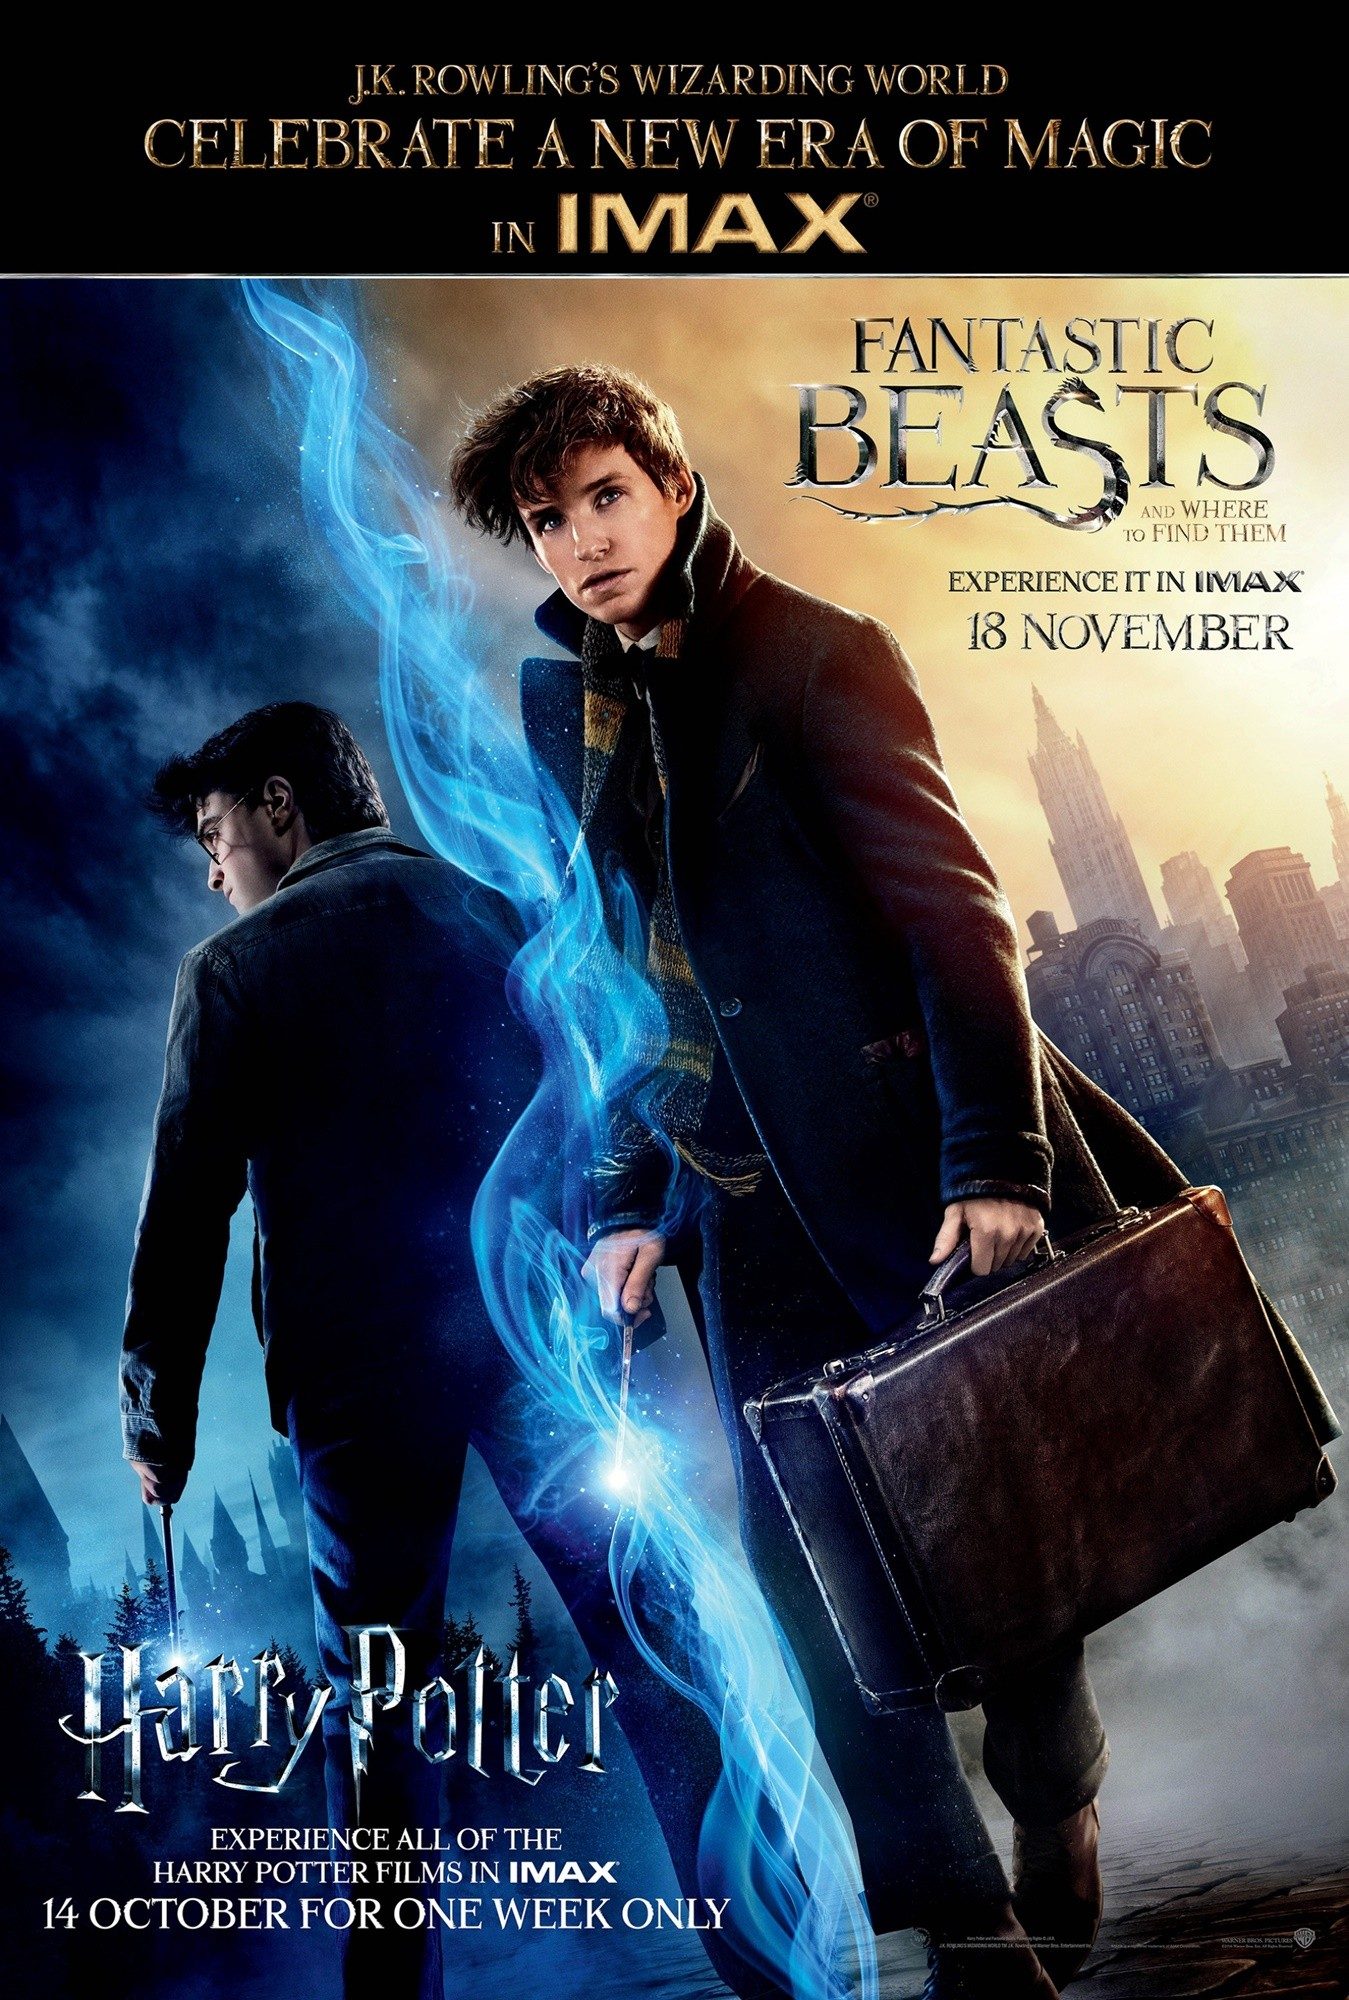 Fantastic Beasts and Where to Find Them download the new version